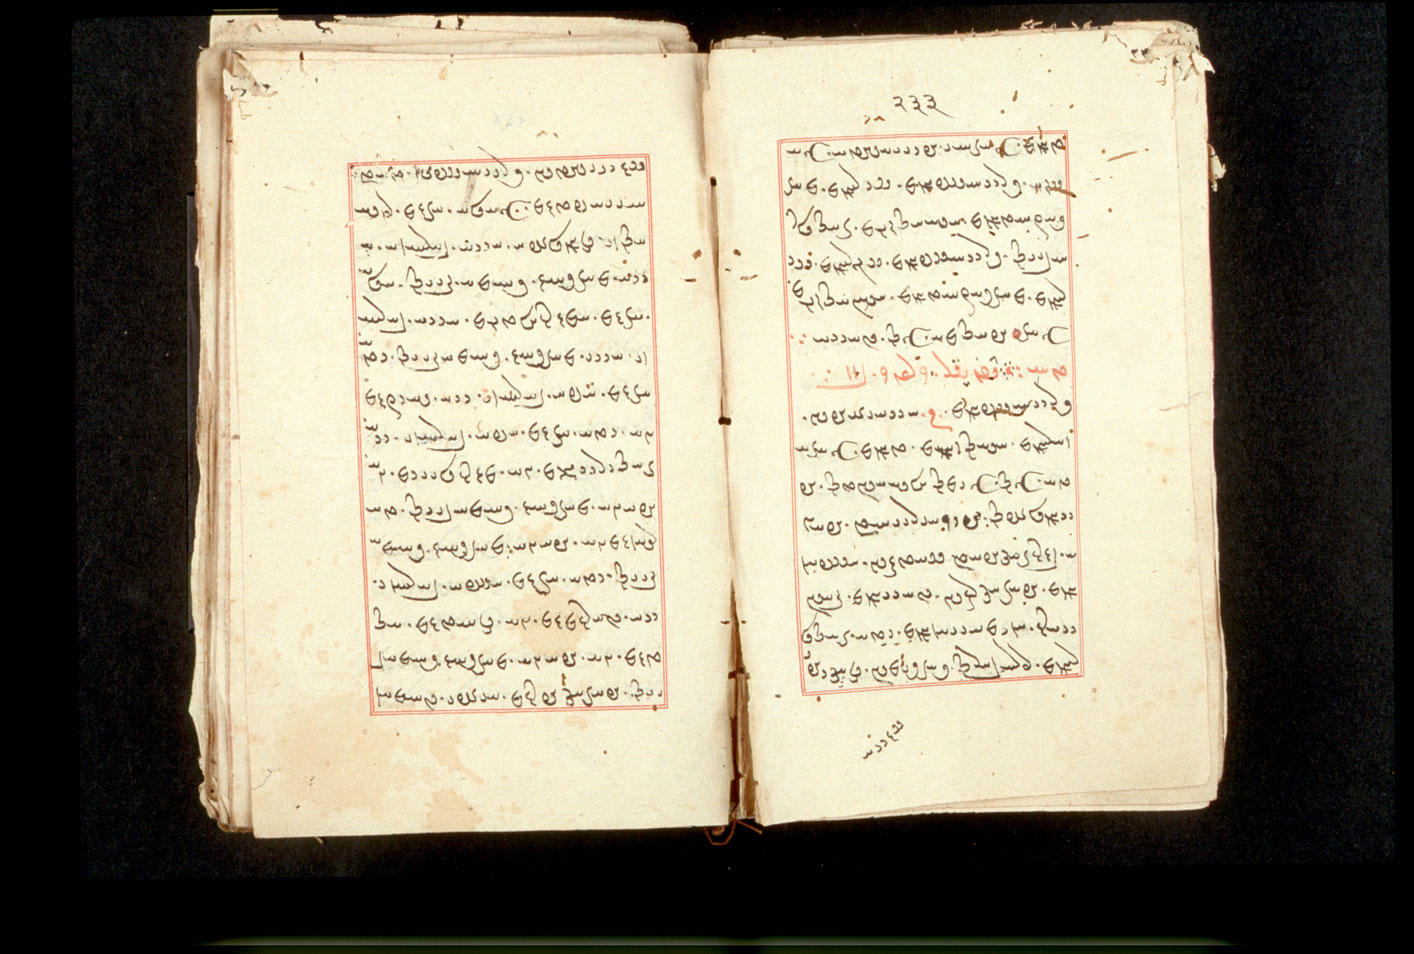 Folios 233v (right) and 234r (left)